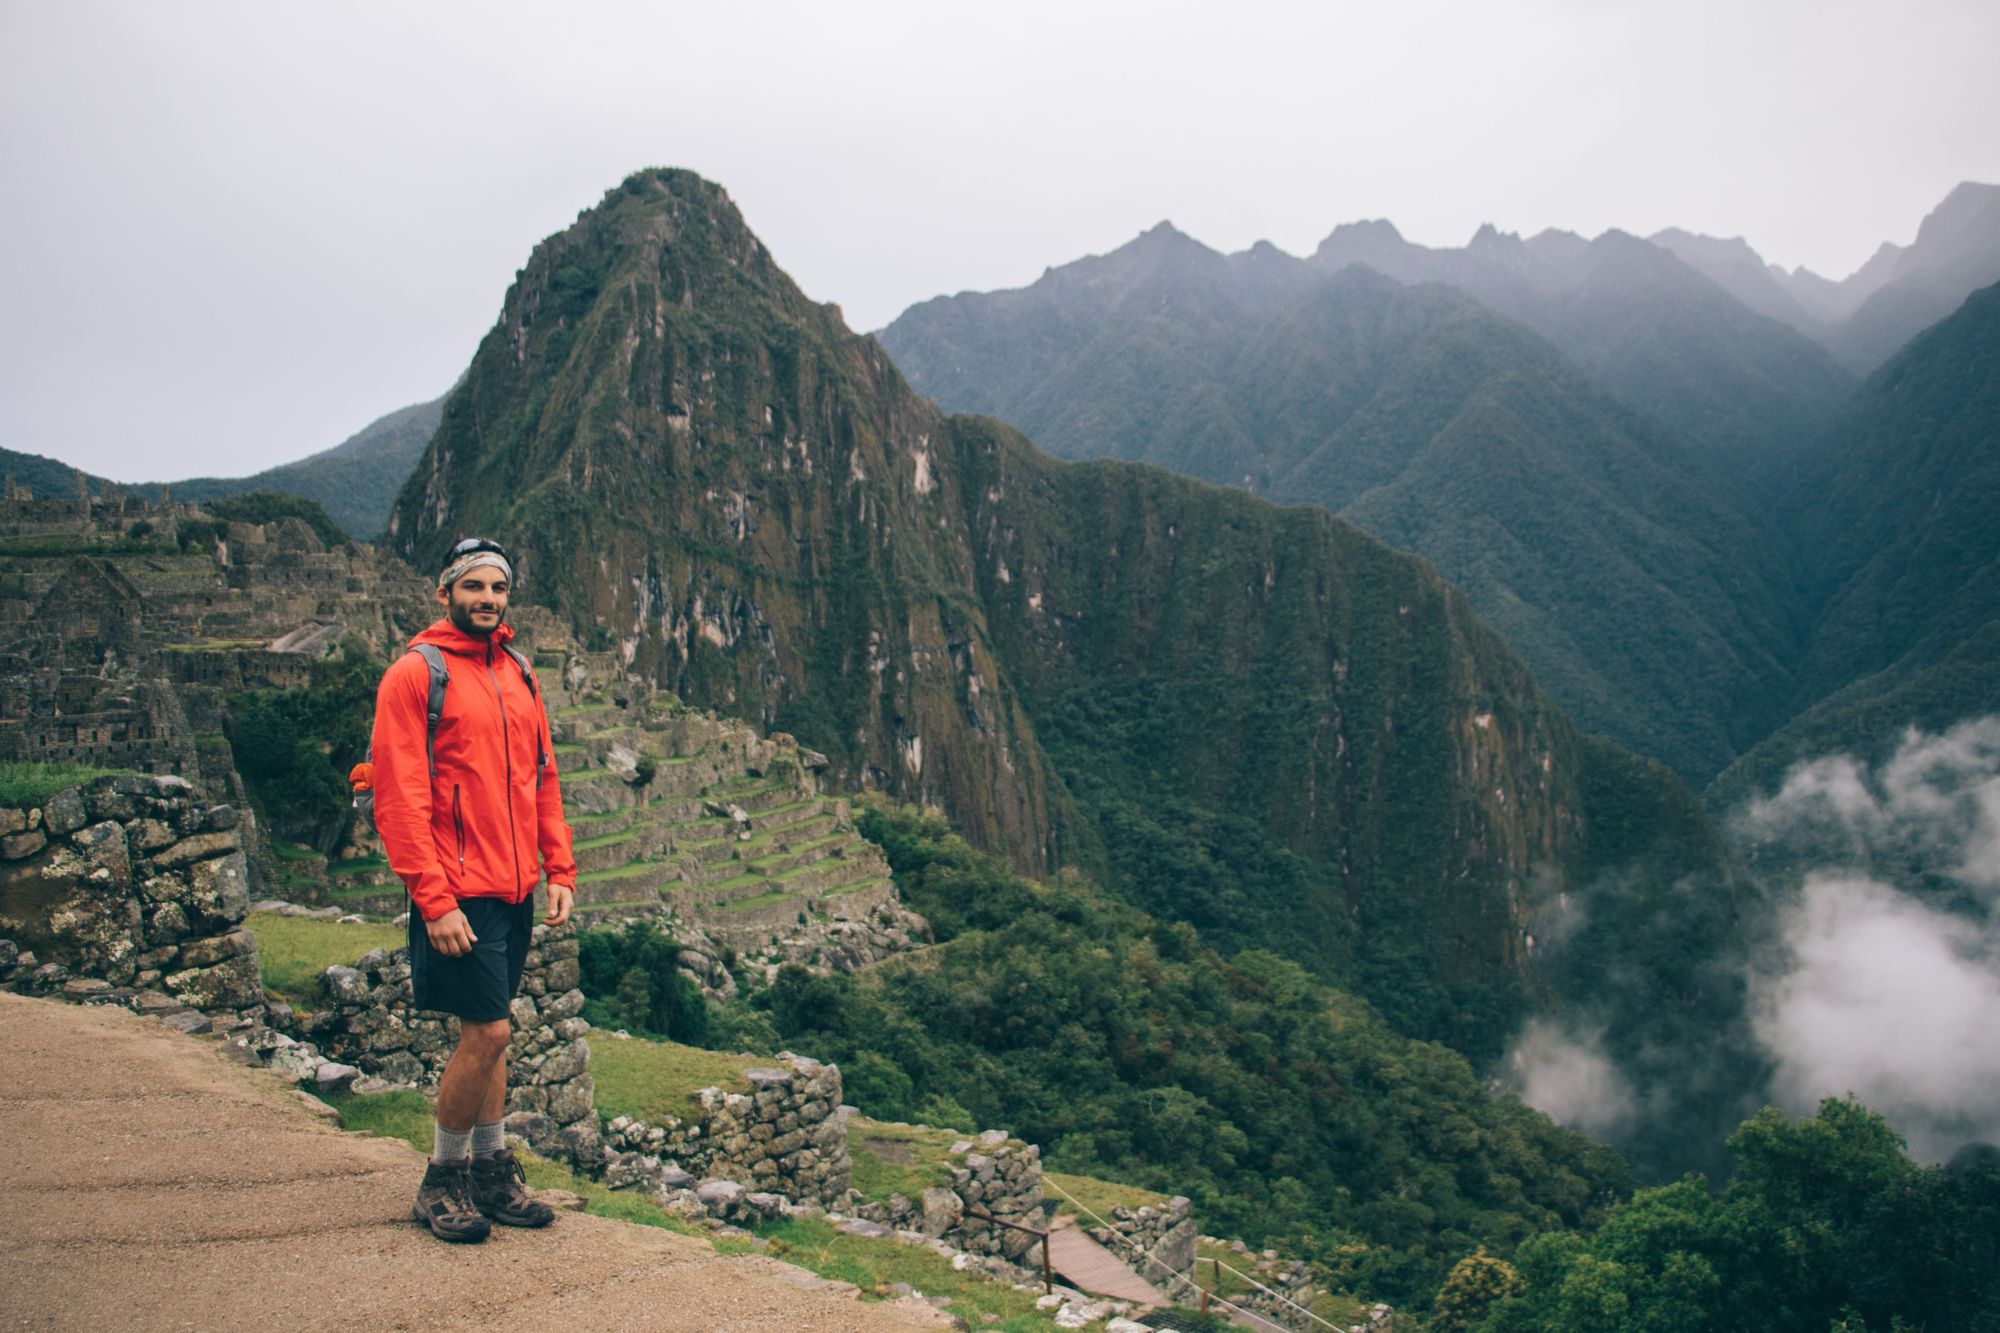 Enjoying the sites at Machu Picchu, one of the world's great archaeological sites. Photo: Getty